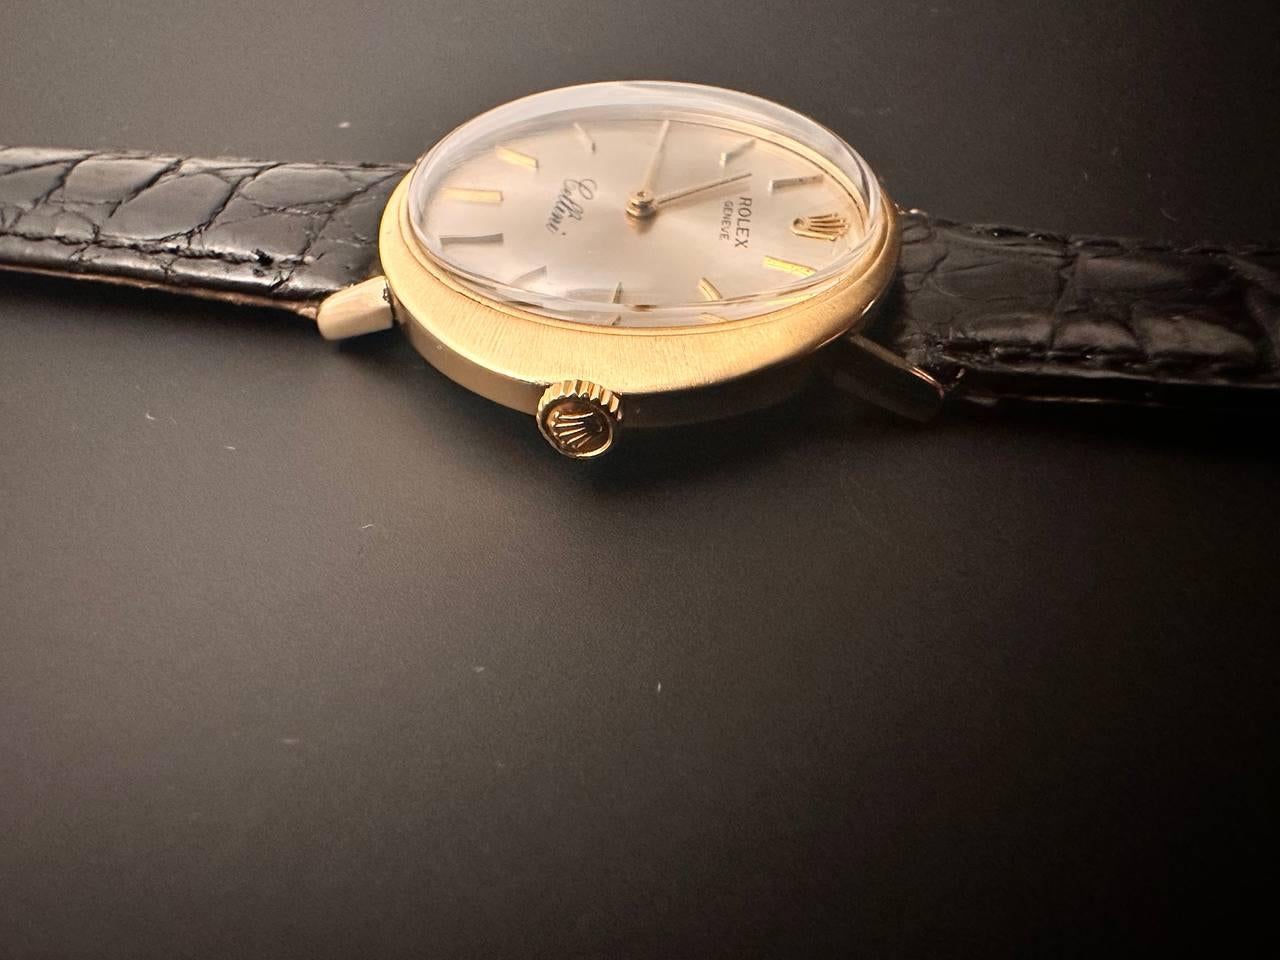 Rolex Cellini Vintage Reference 1600 Watch 4